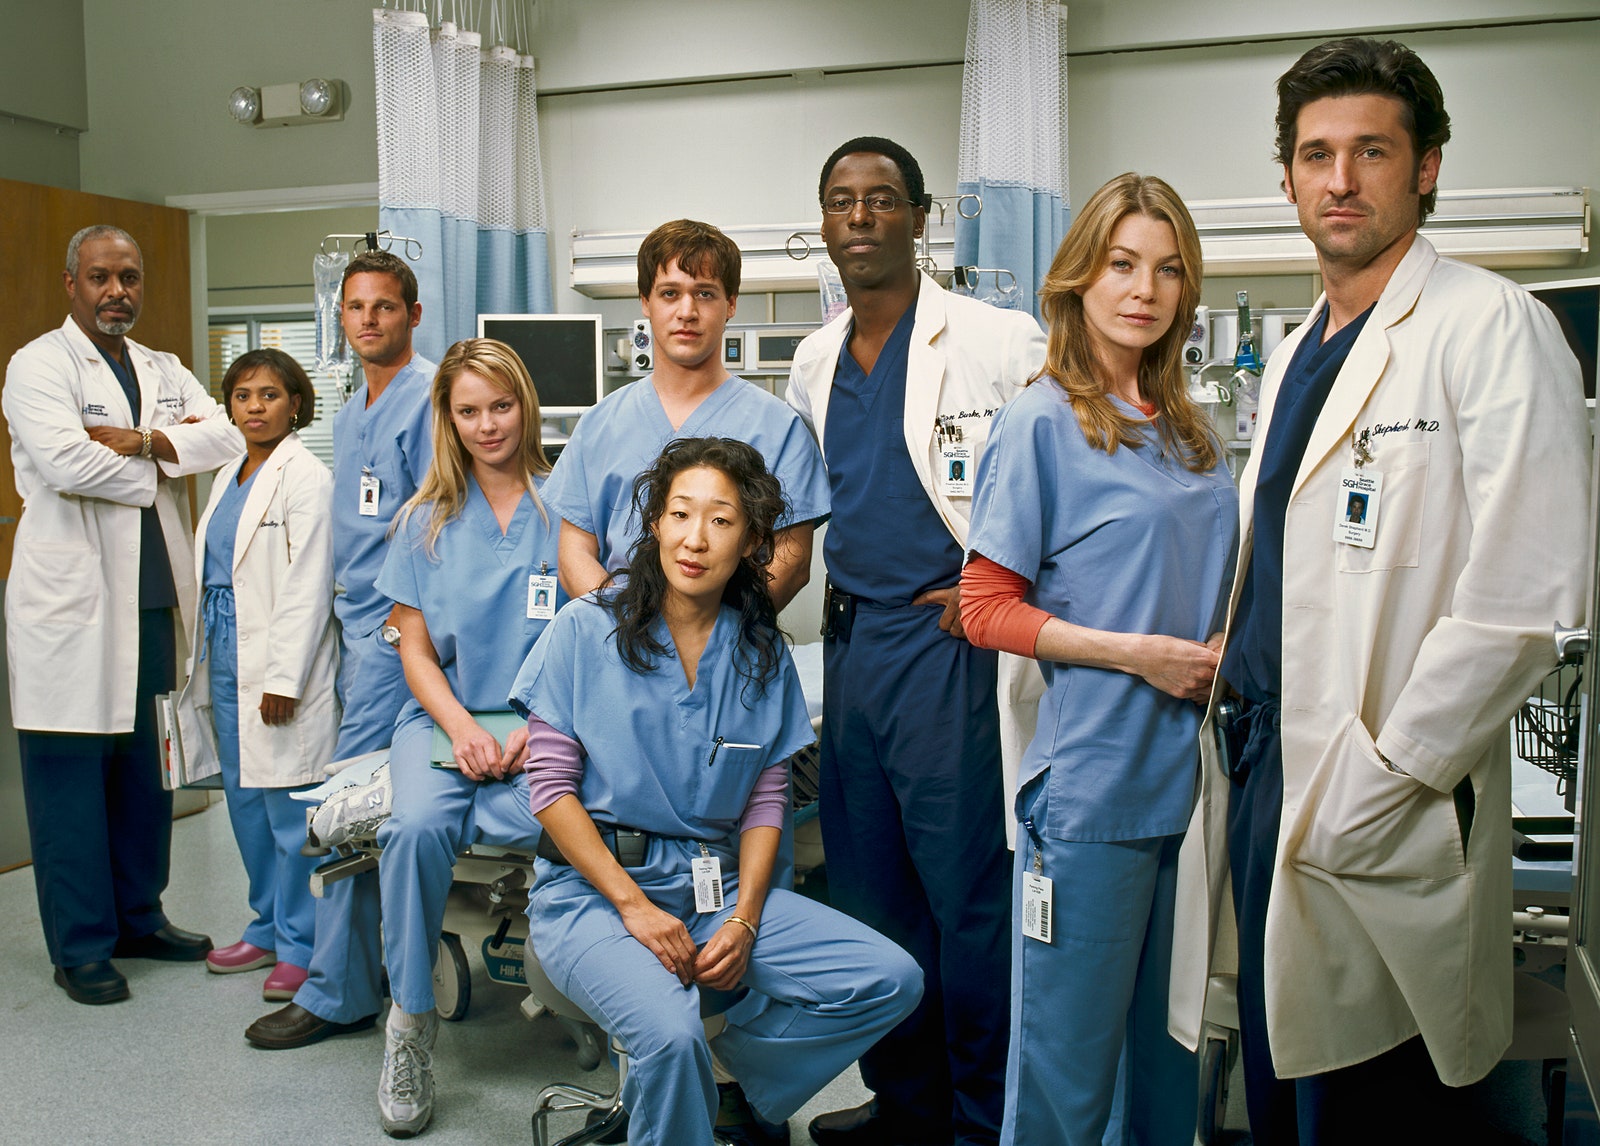 Grey's Anatomy focuses on young people struggling to be doctors and doctors struggling to stay human. It's the drama and...